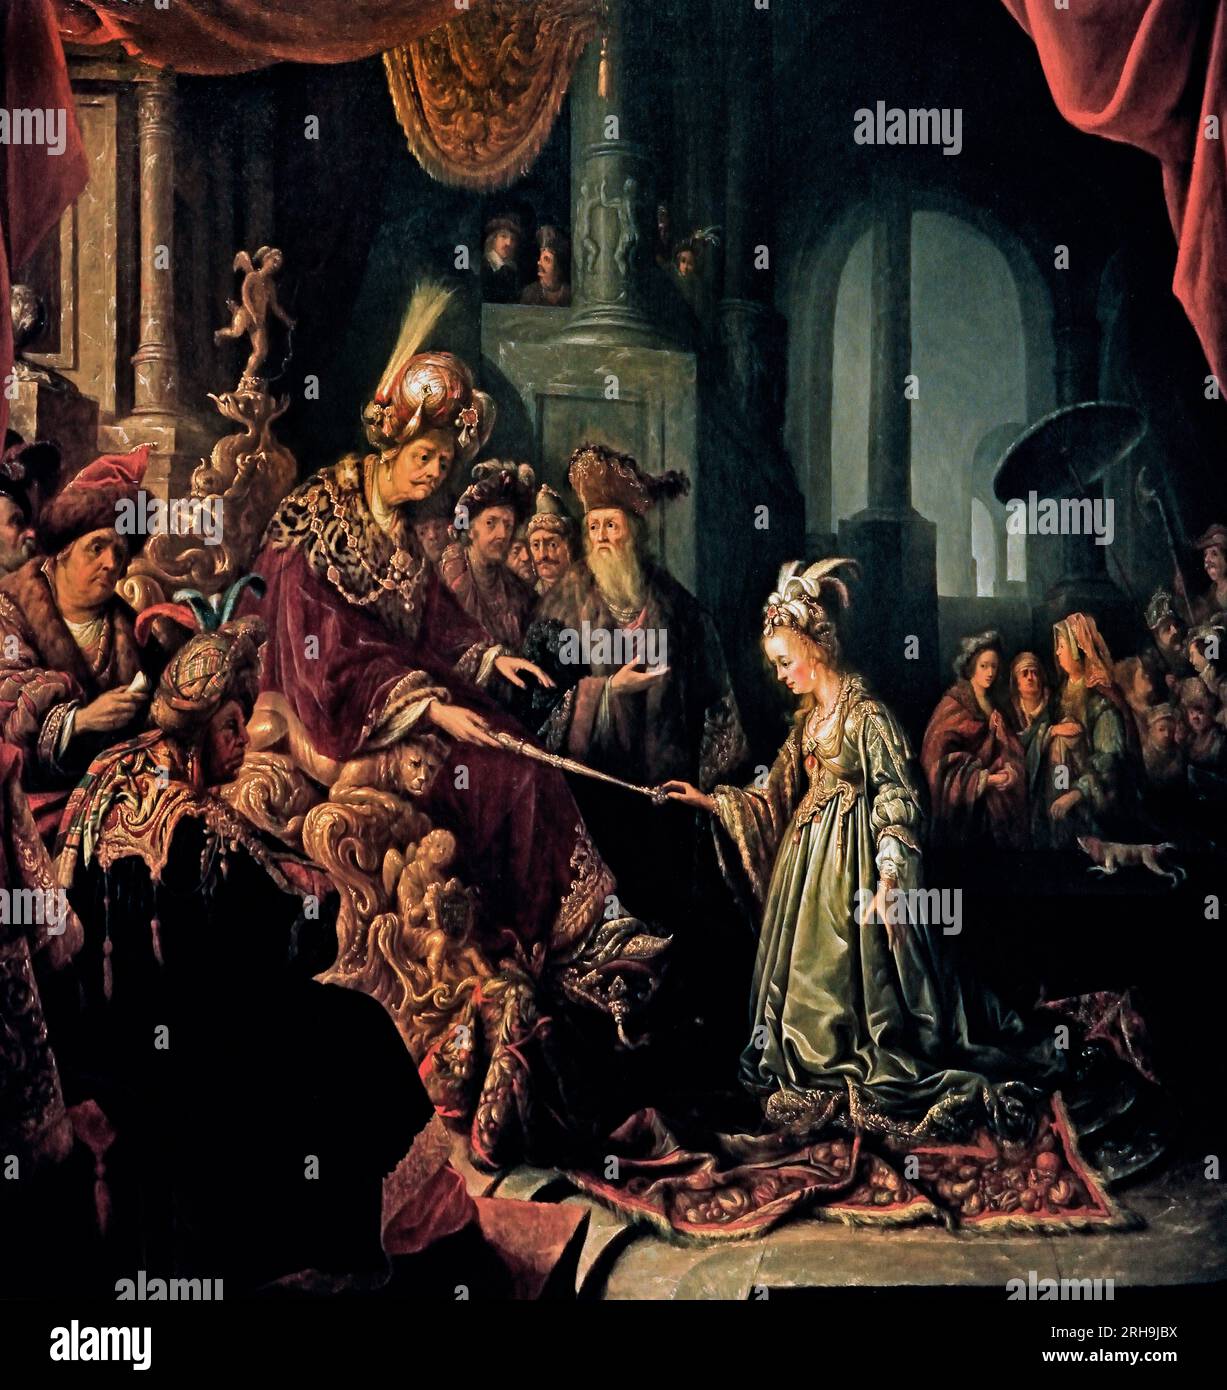 Jan Adriaensz van Staveren (Leiden 1613/14 – 1669 Leiden) Esther before Ahasuerus, ca. 1640–45   Dutch, The Netherlands, Holland. During  Babylonian captivity of the Jews beautiful Jewish orphan Esther, heroine Book of Esther, won the heart of the austere Persian king Ahasuerus and became his wife . Esther had been raised by her cousin Mordecai, who made Esther swear that she would keep her Jewish identity a secret from her husband.  Ahasuerus appointed minister the anti-Semite Haman, who issued a decree to kill all Jews, Mordecai begged Esther to reveal her Jewish heritage to Ahasuerus . Stock Photo